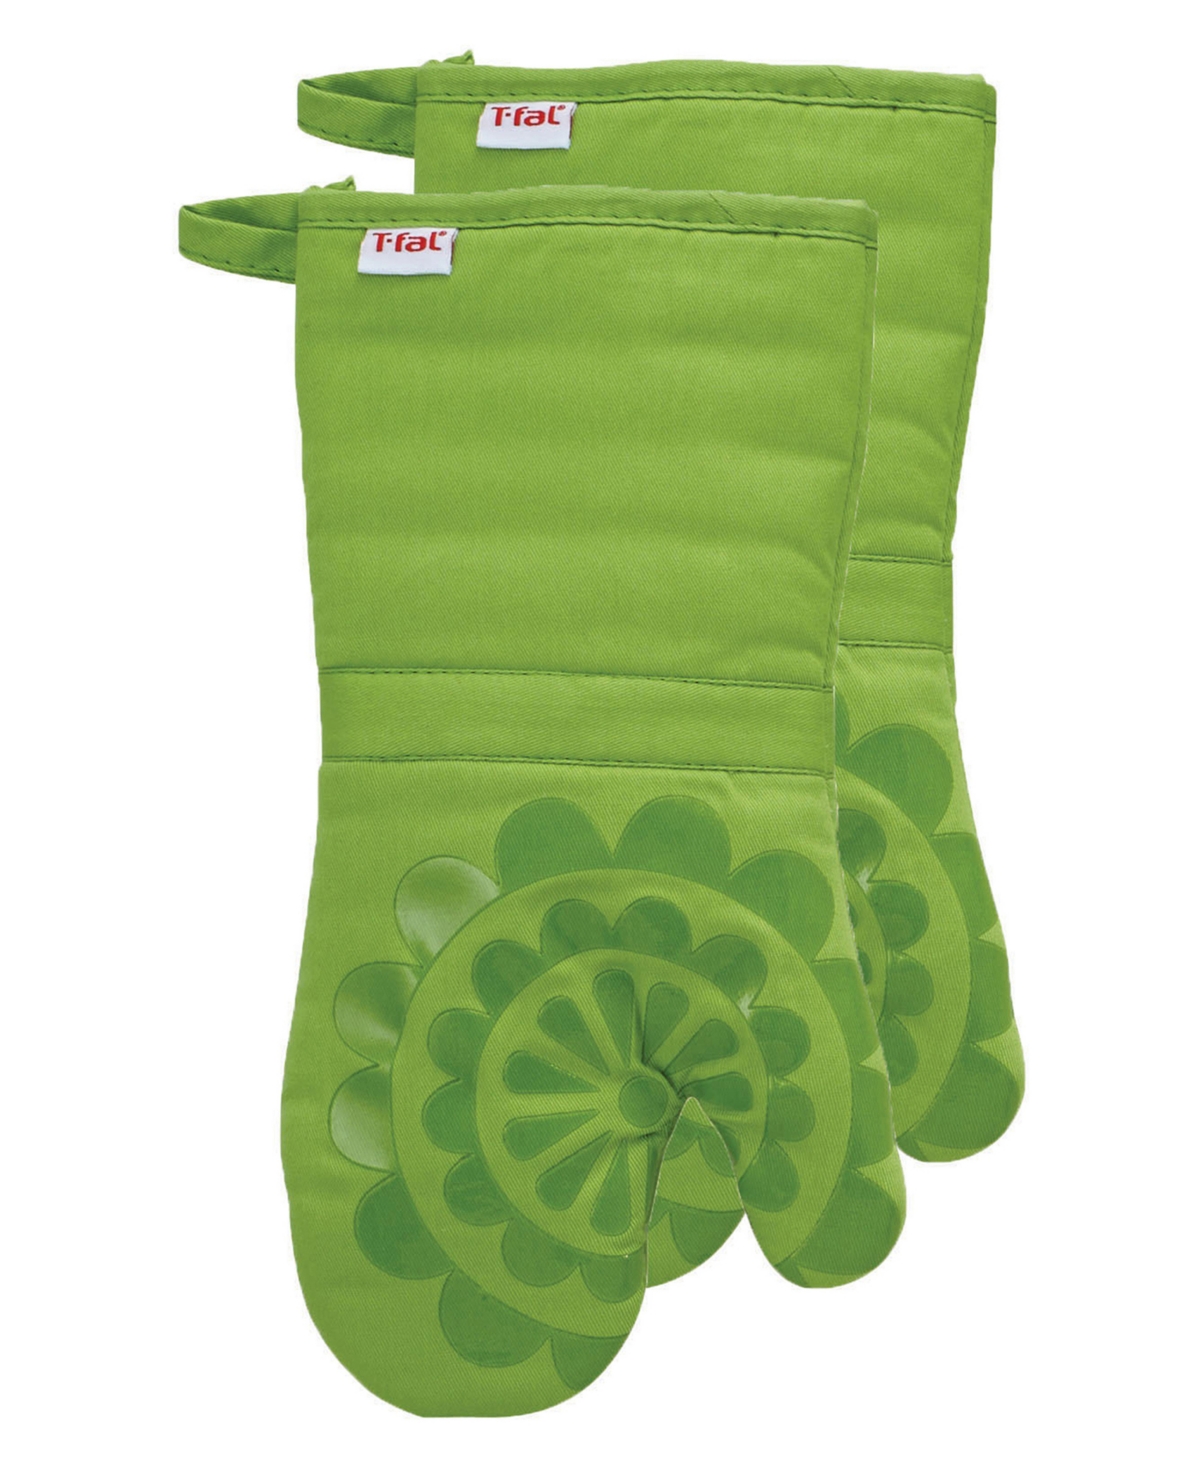 Medallion Print Silicone and Cotton Twill Oven Mitt, Set of 2 - Breeze